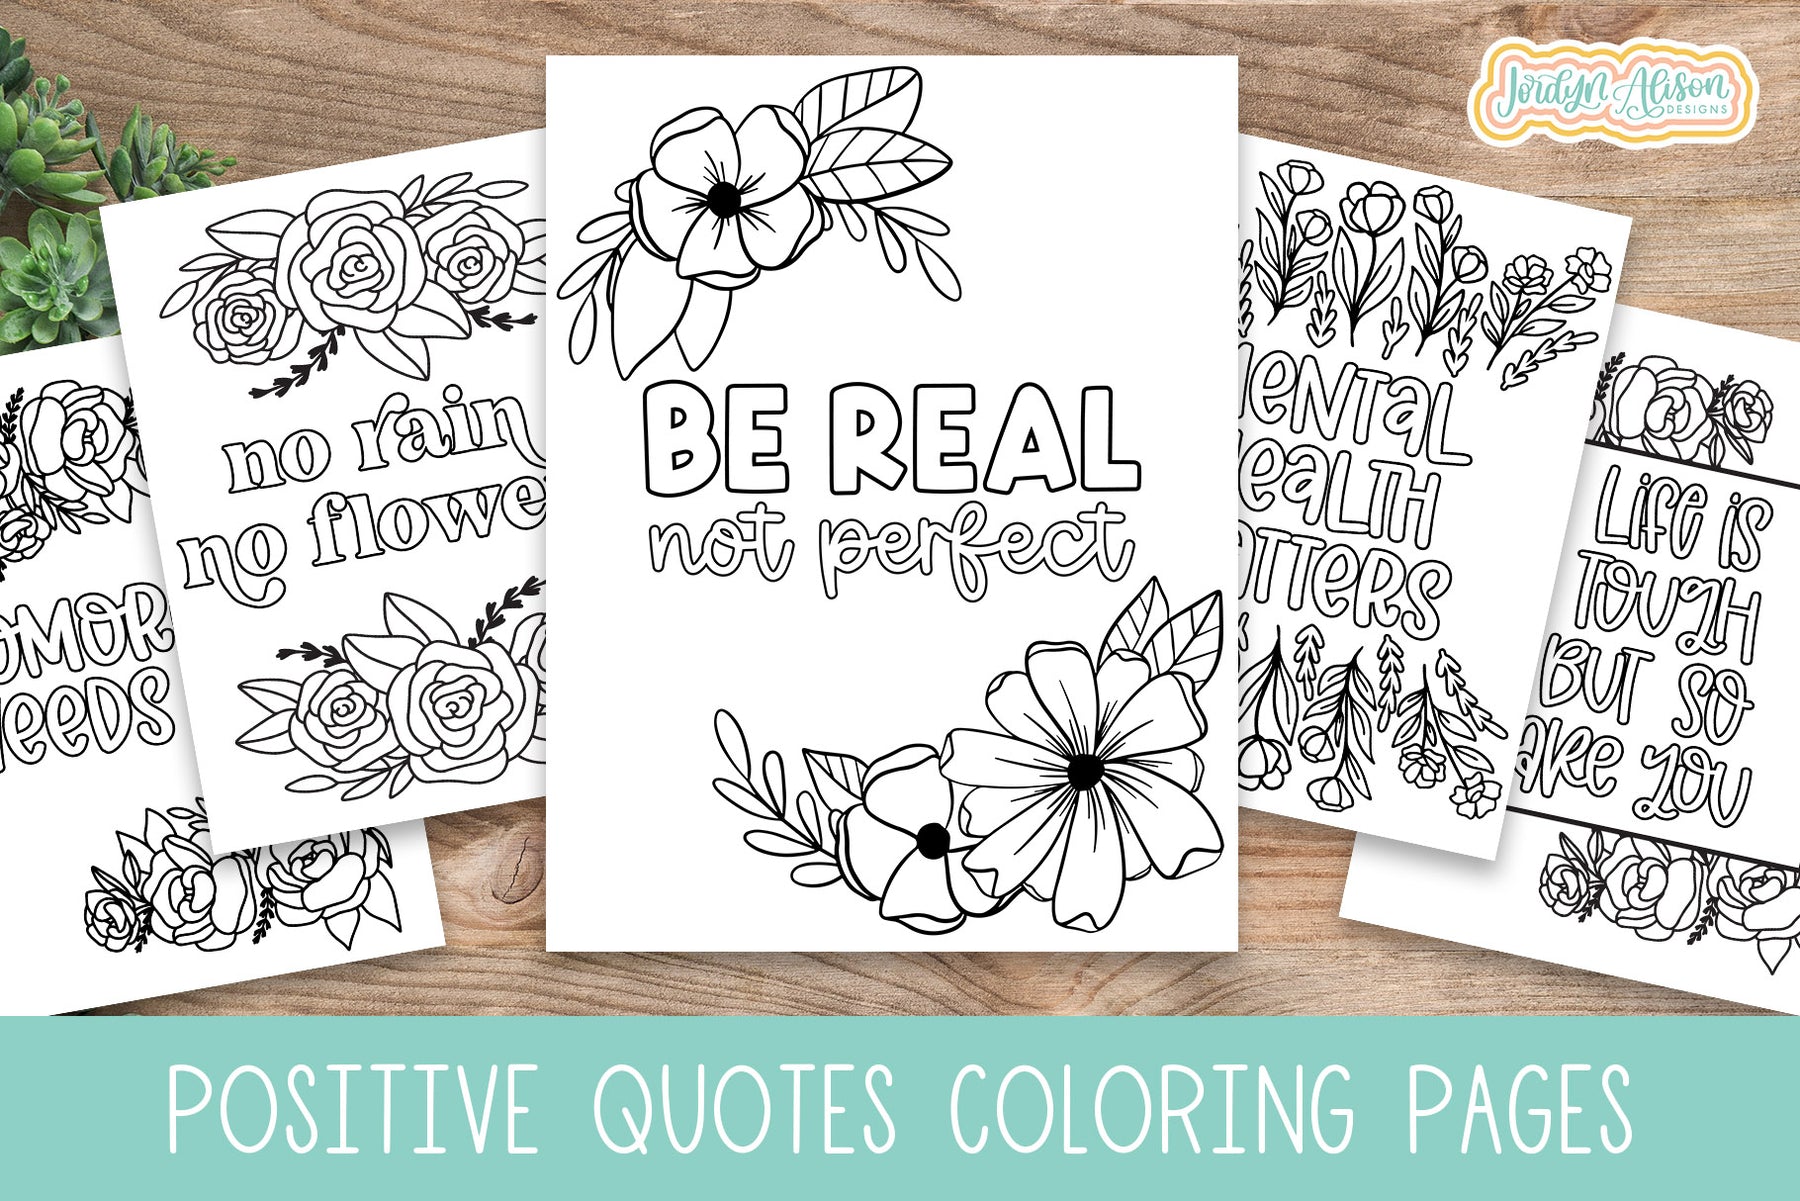 Positive quotes coloring pages for kids adults â